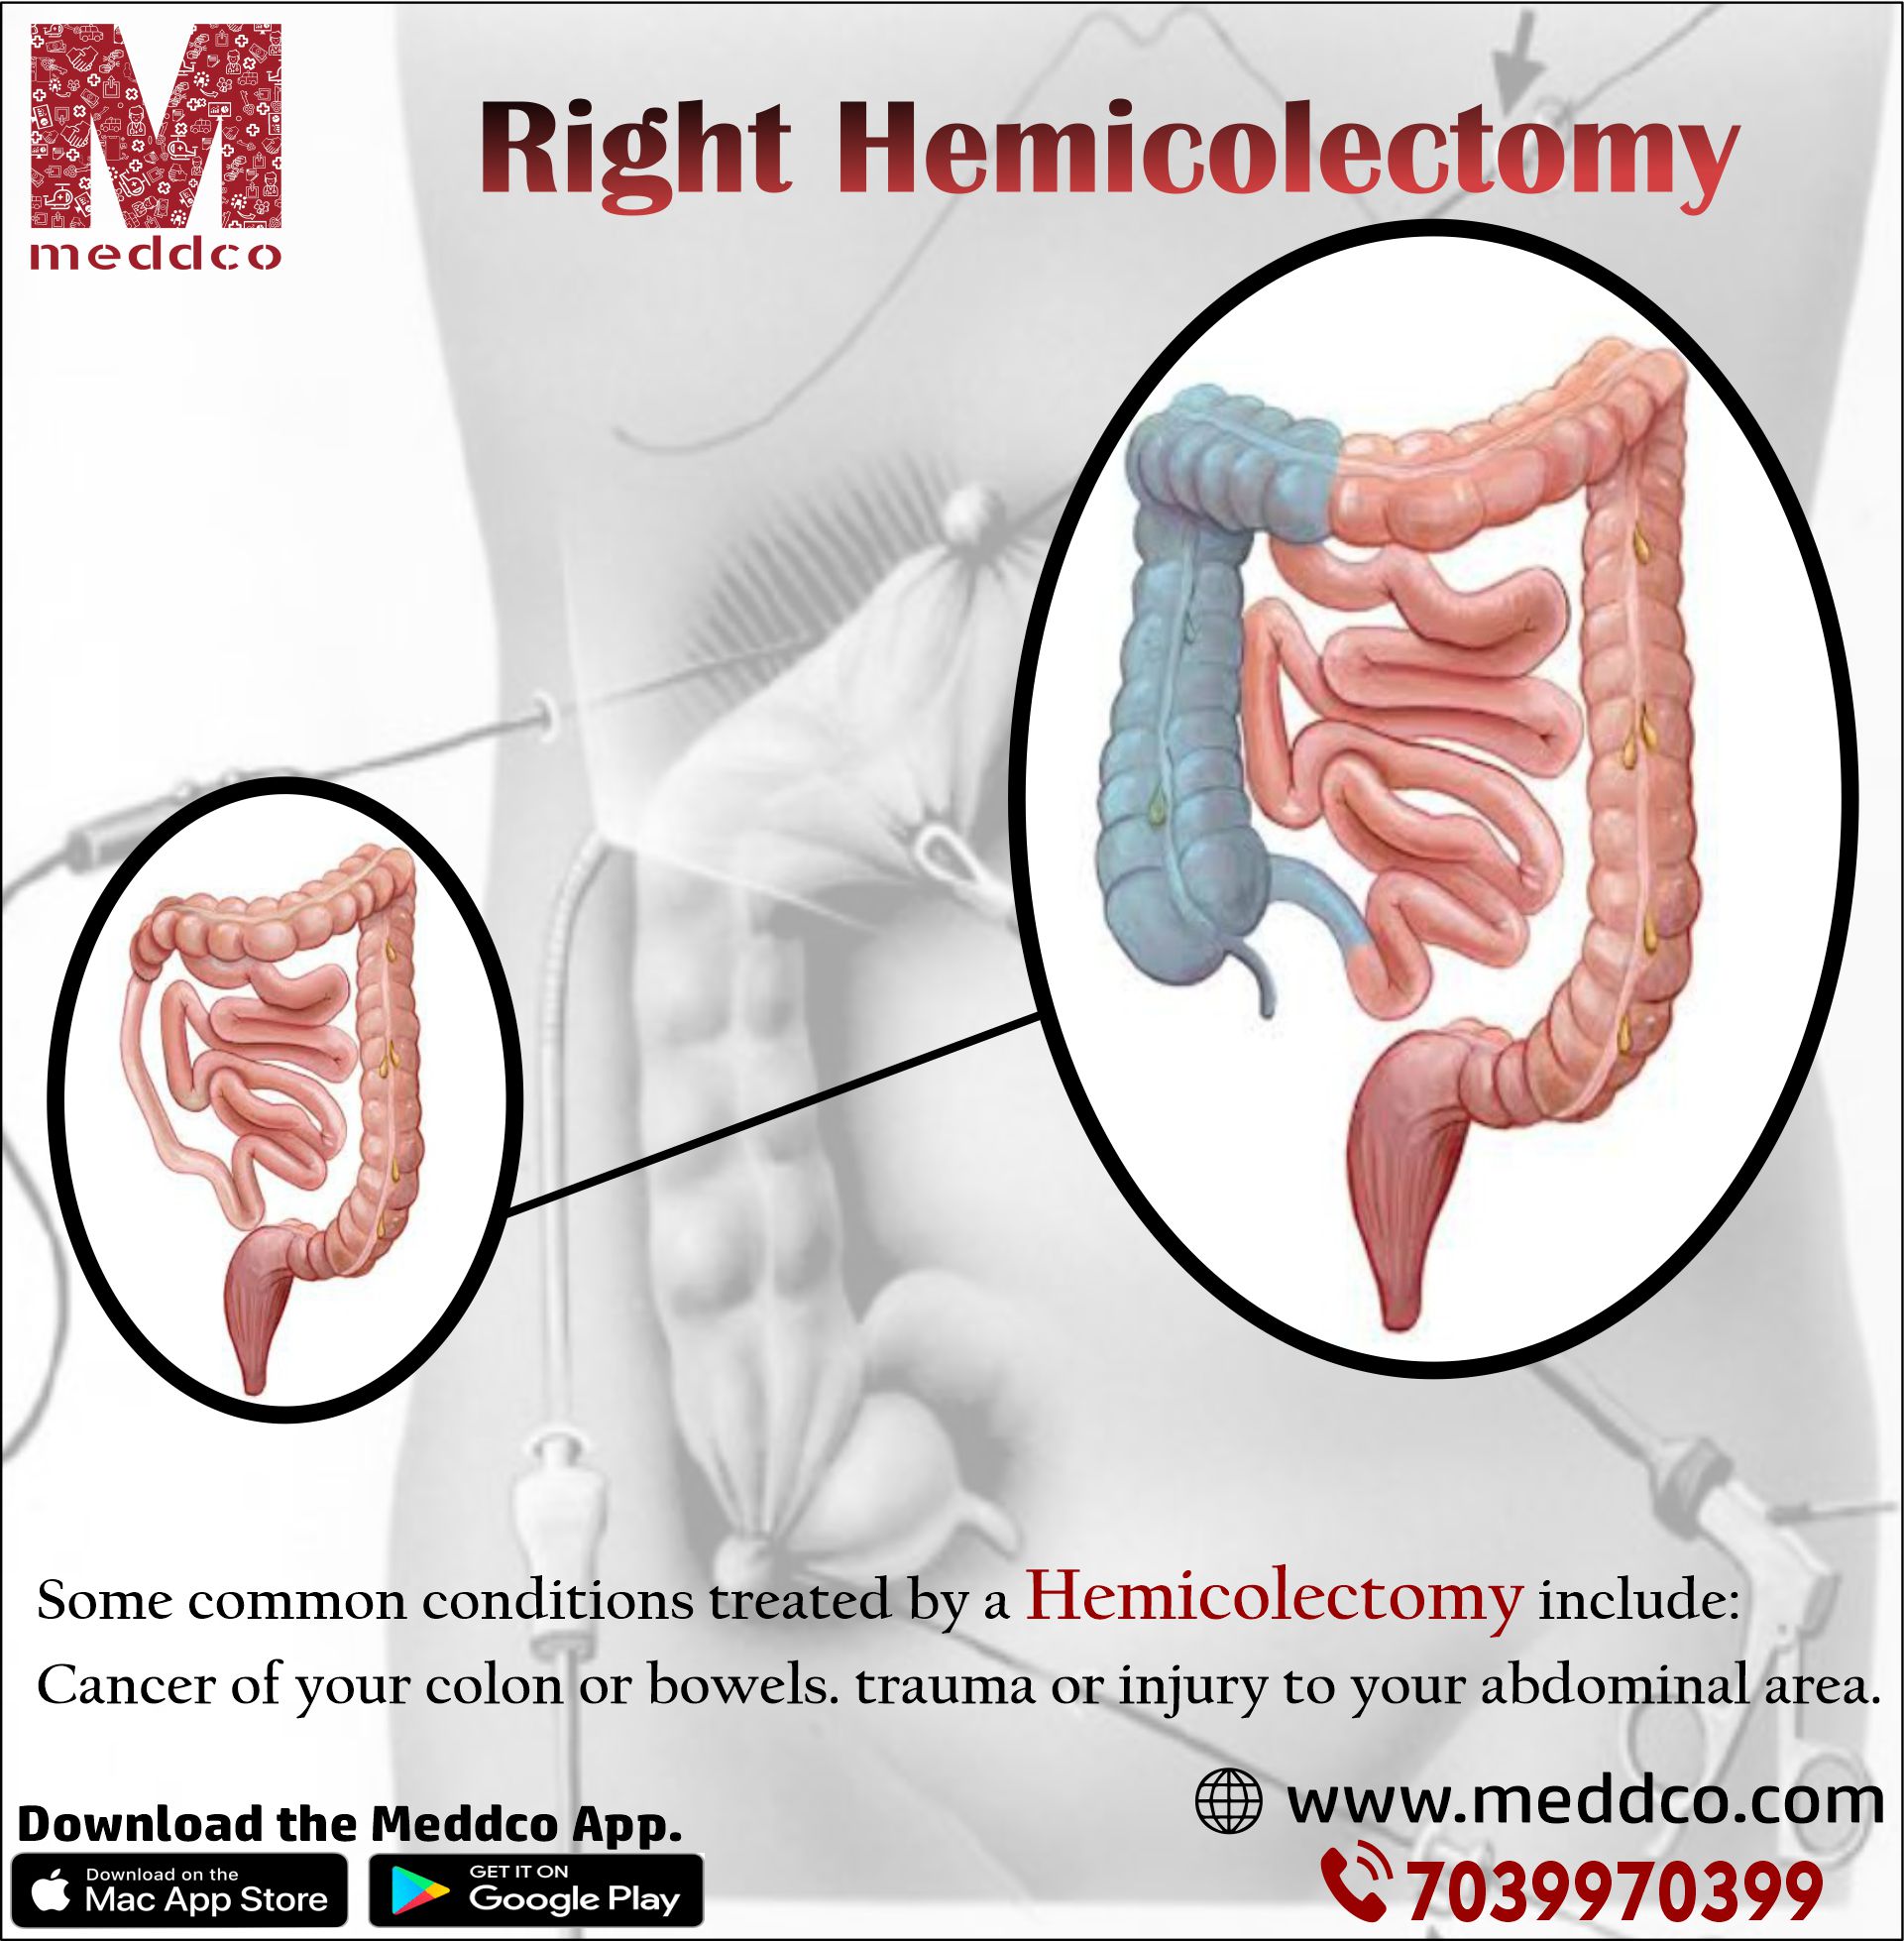 Why right hemicolectomy is done?